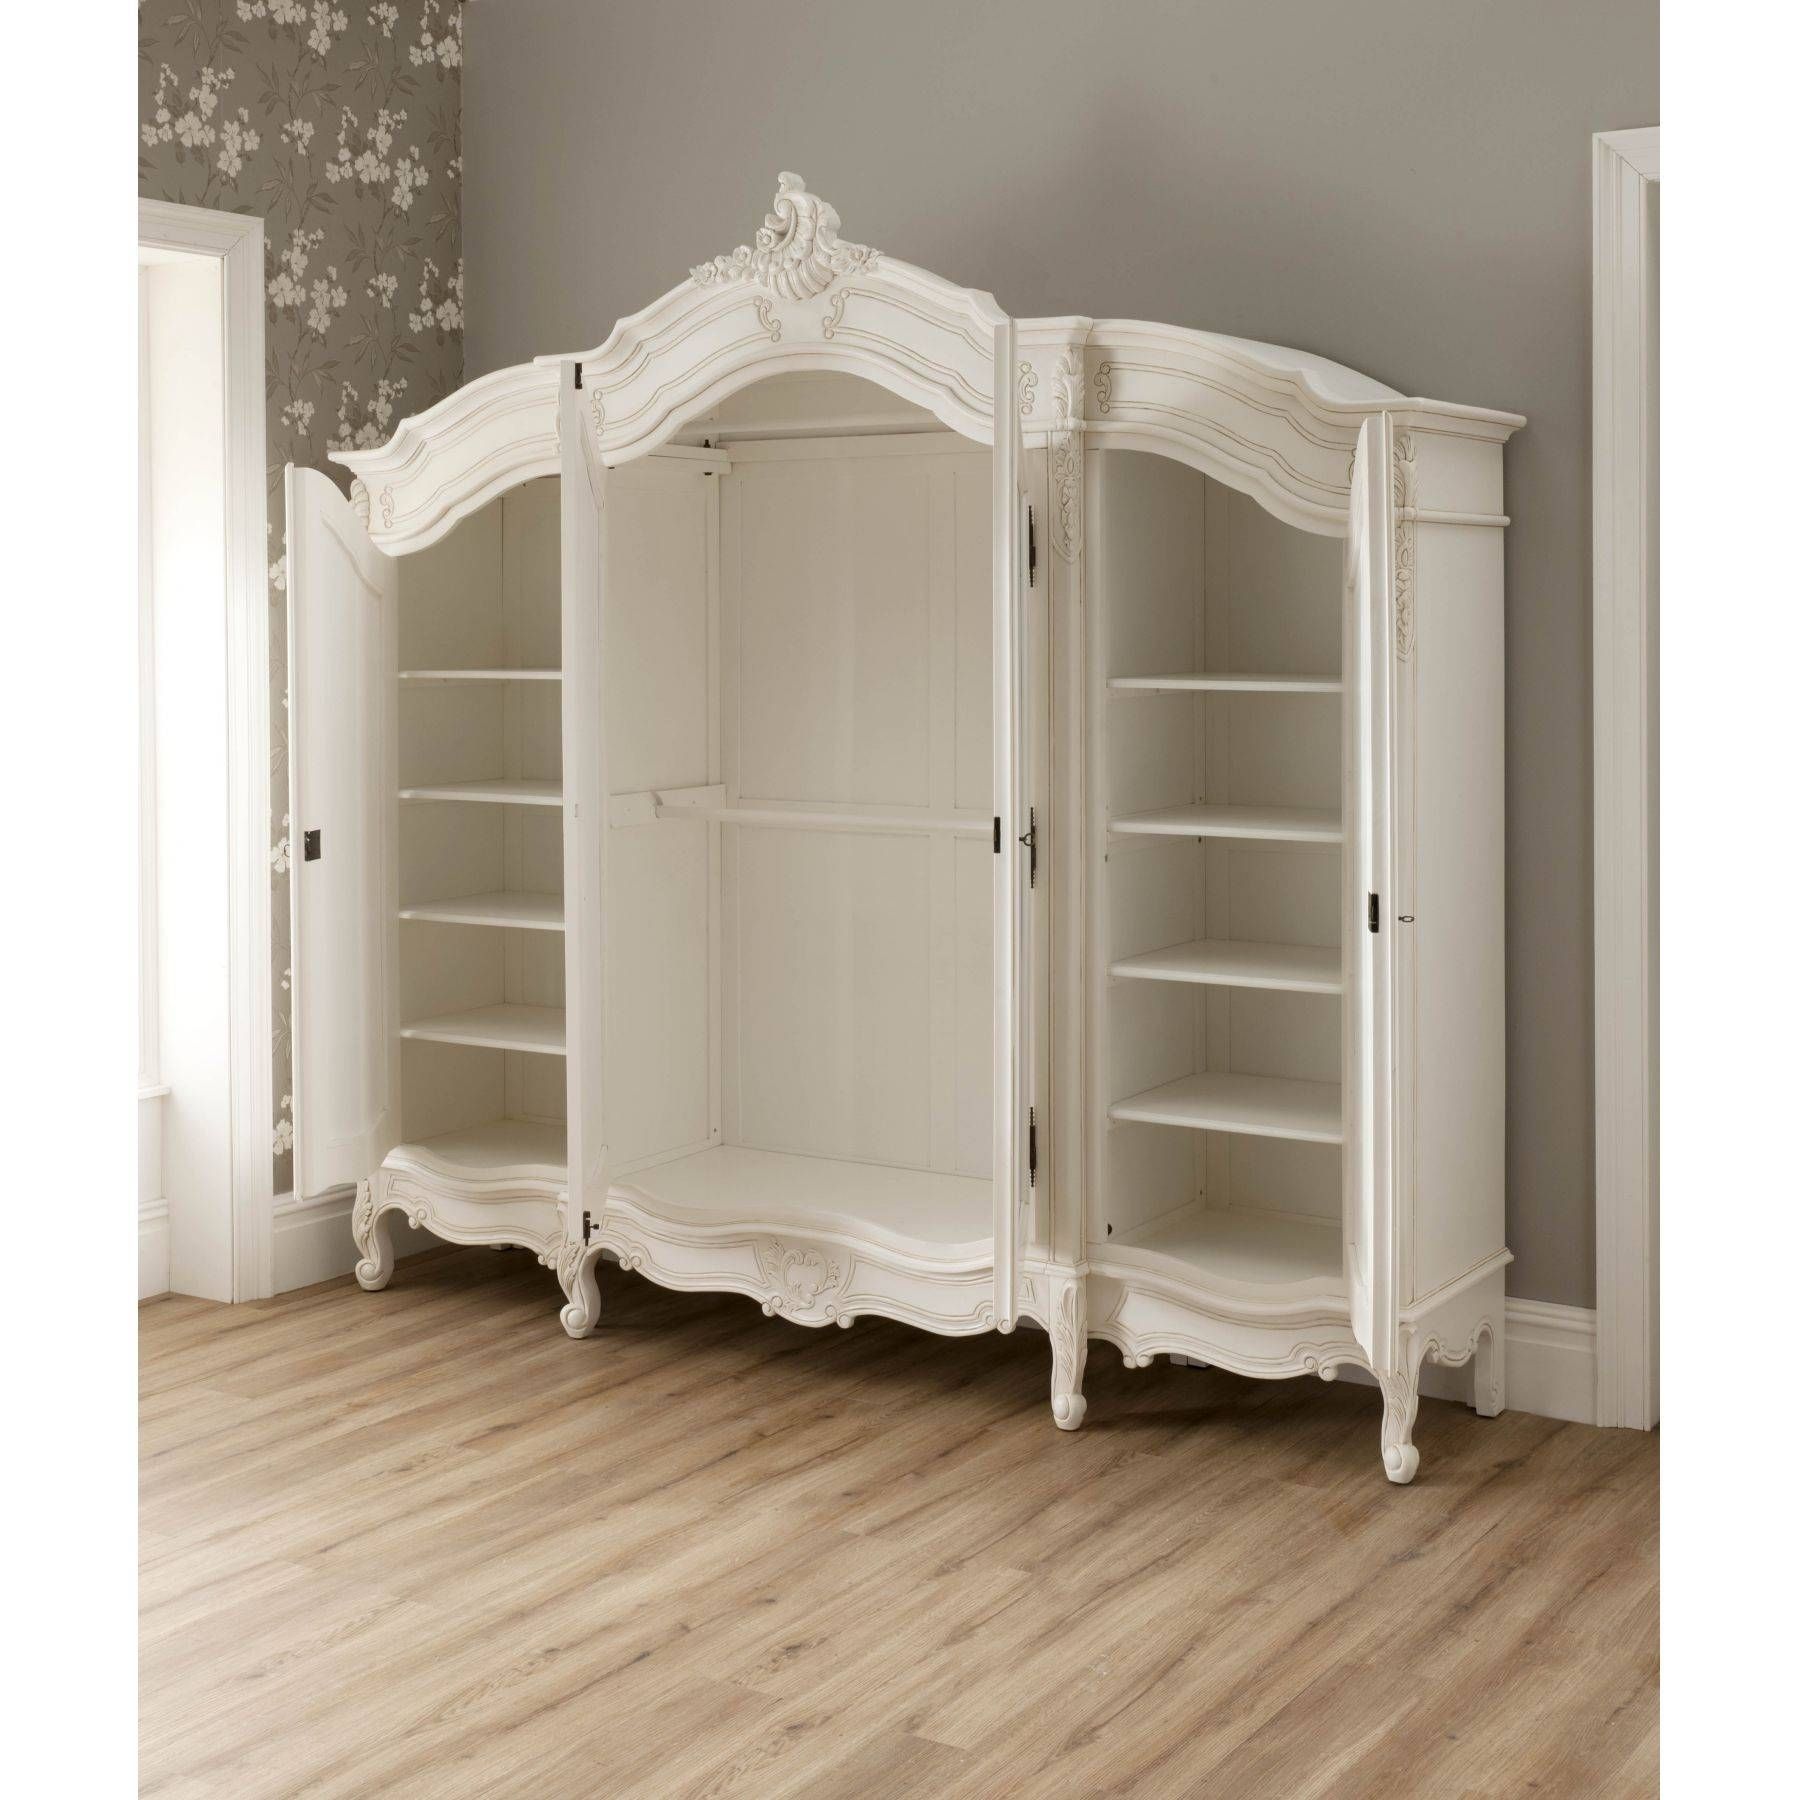 La Rochelle Antique French Wardrobe Working Well Alongside Our For White Wardrobes French Style (View 4 of 15)